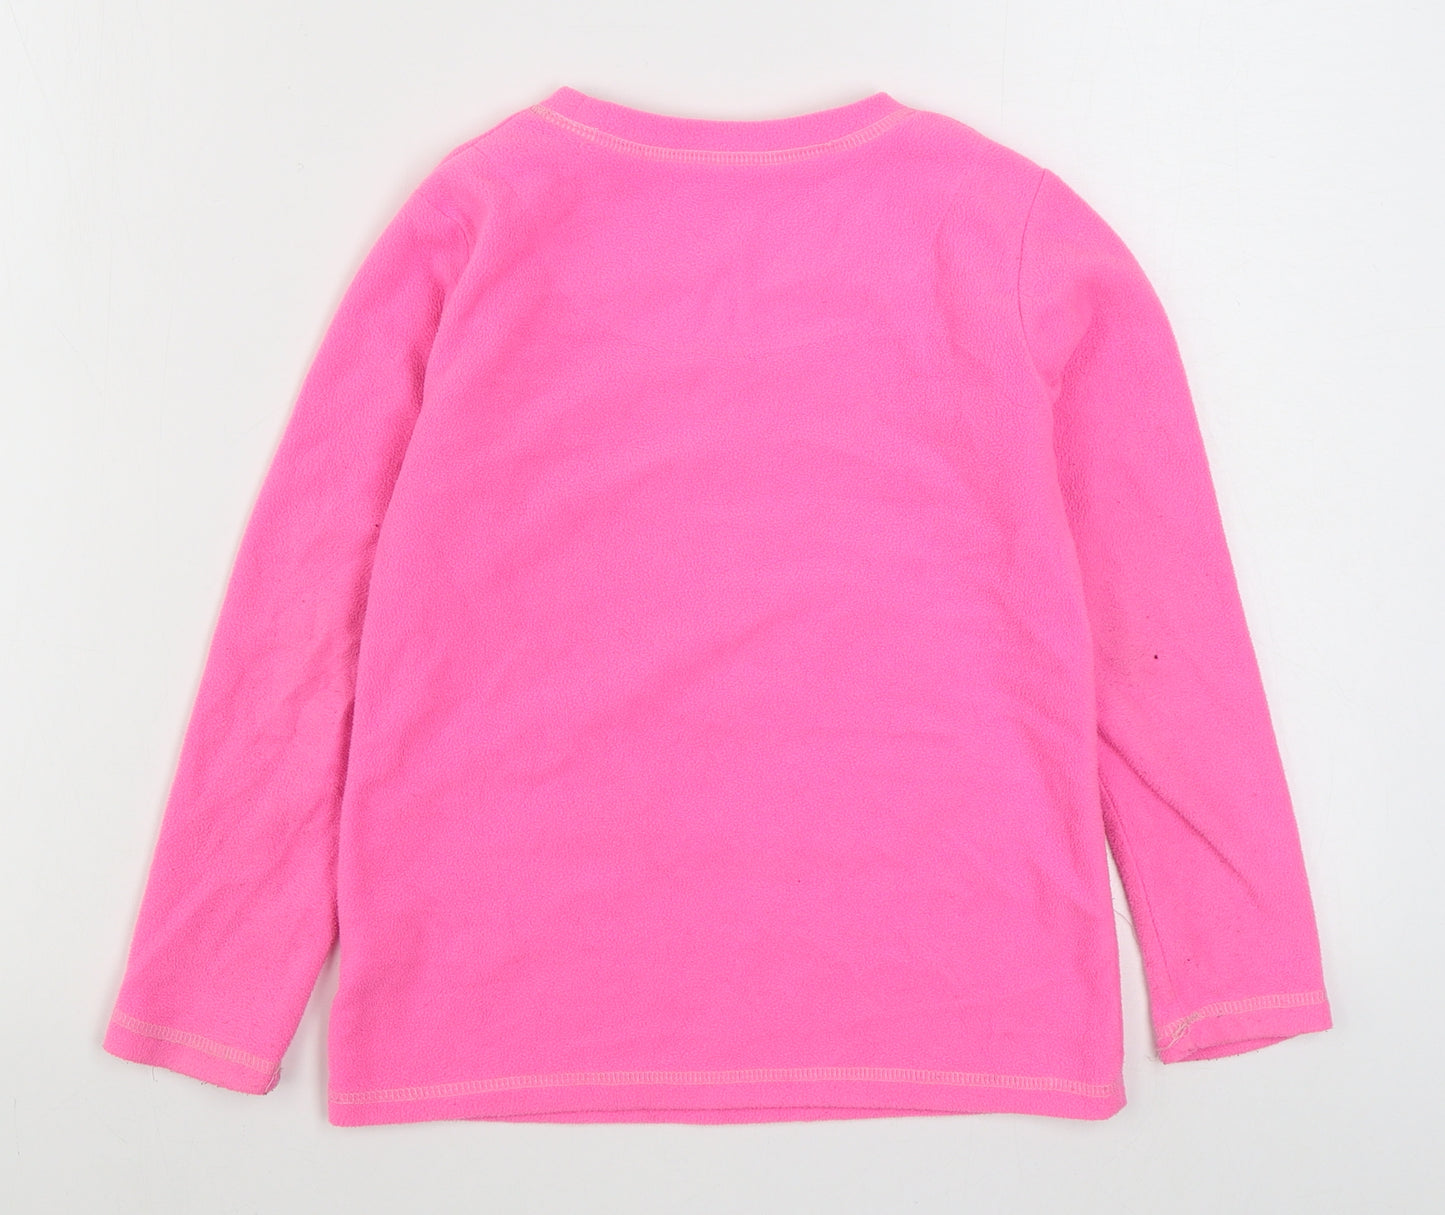 Dunnes Stores Girls Pink Solid Polyester Top Pyjama Top Size 7-8 Years  Pullover - Unicorn